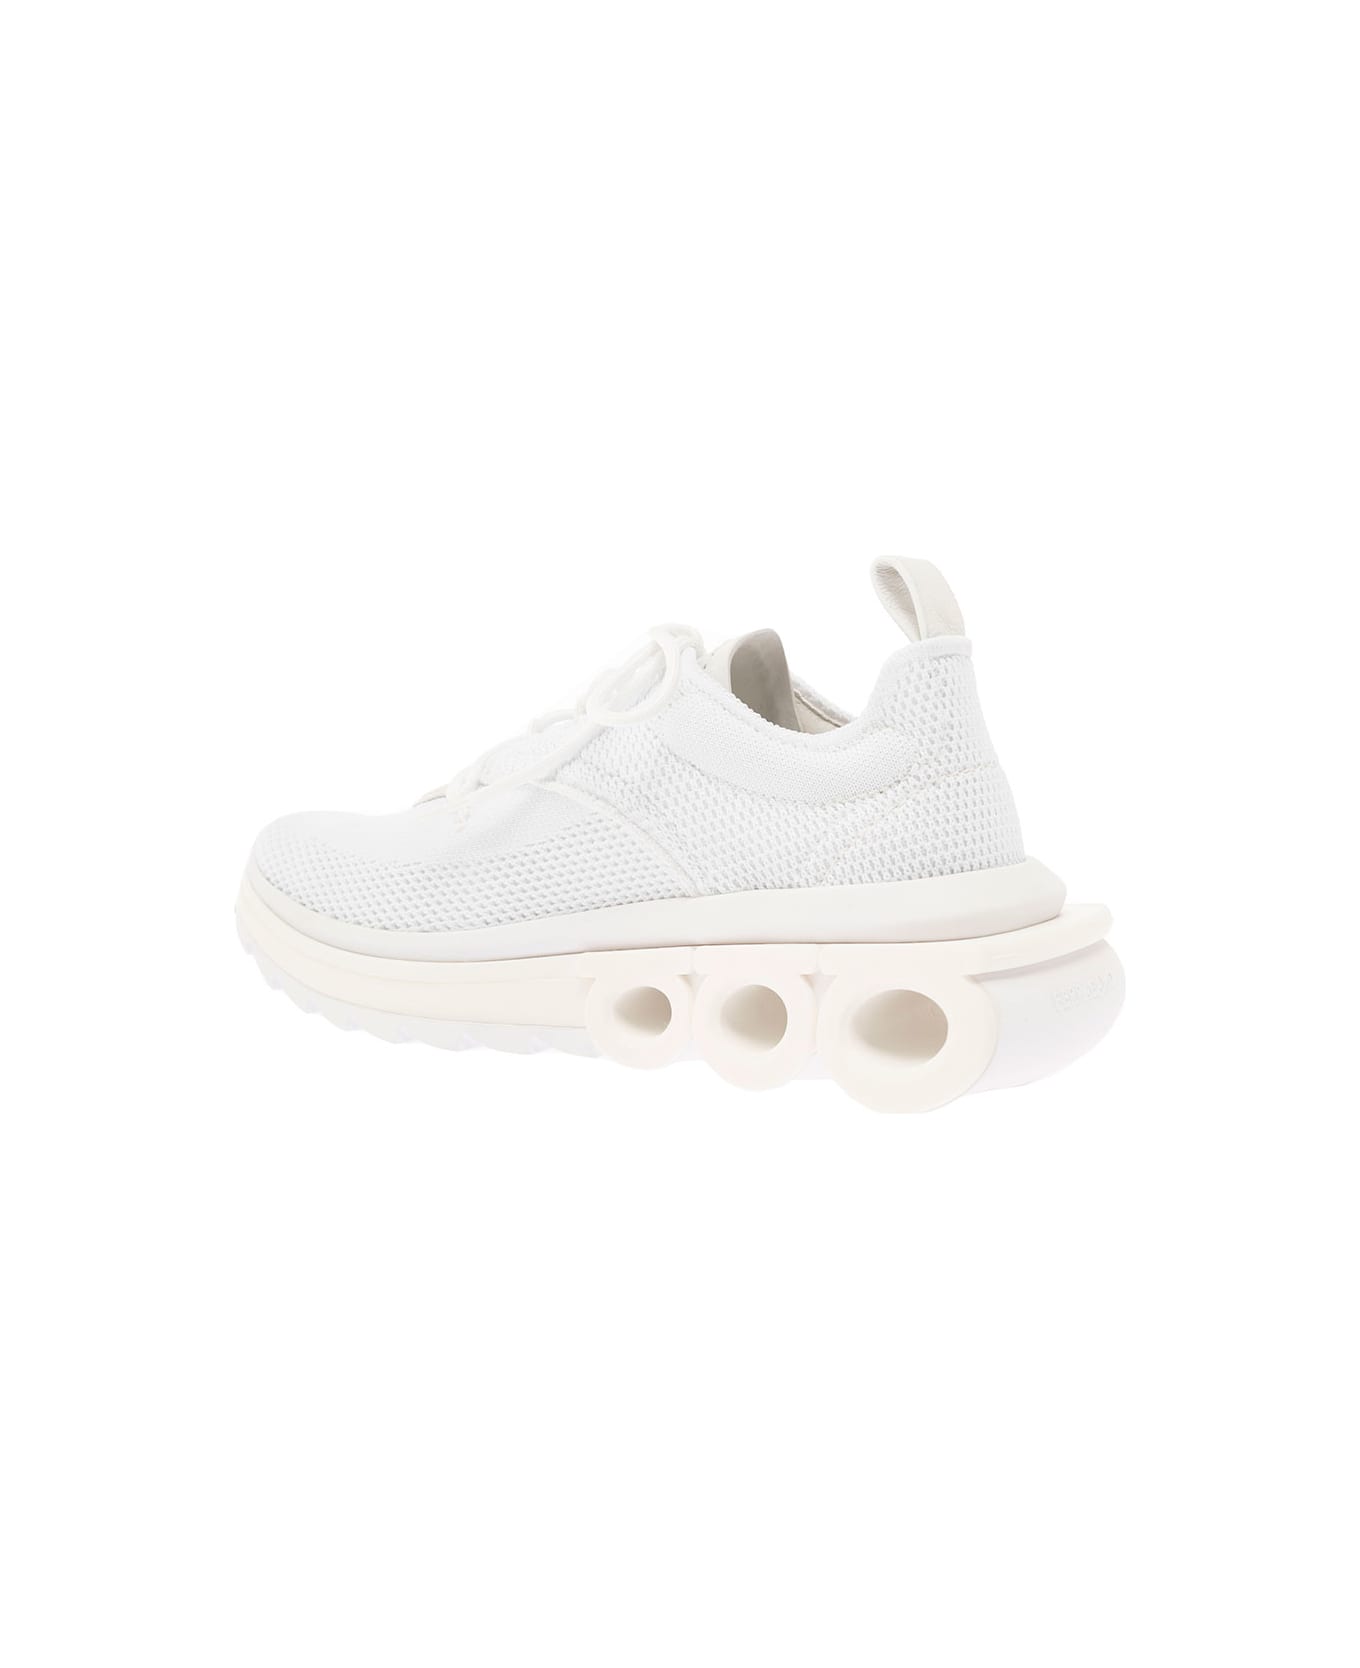 Ferragamo 'nima' White Low Top Sneakers With Gancini Detail In Mixed Materials Woman - White スニーカー